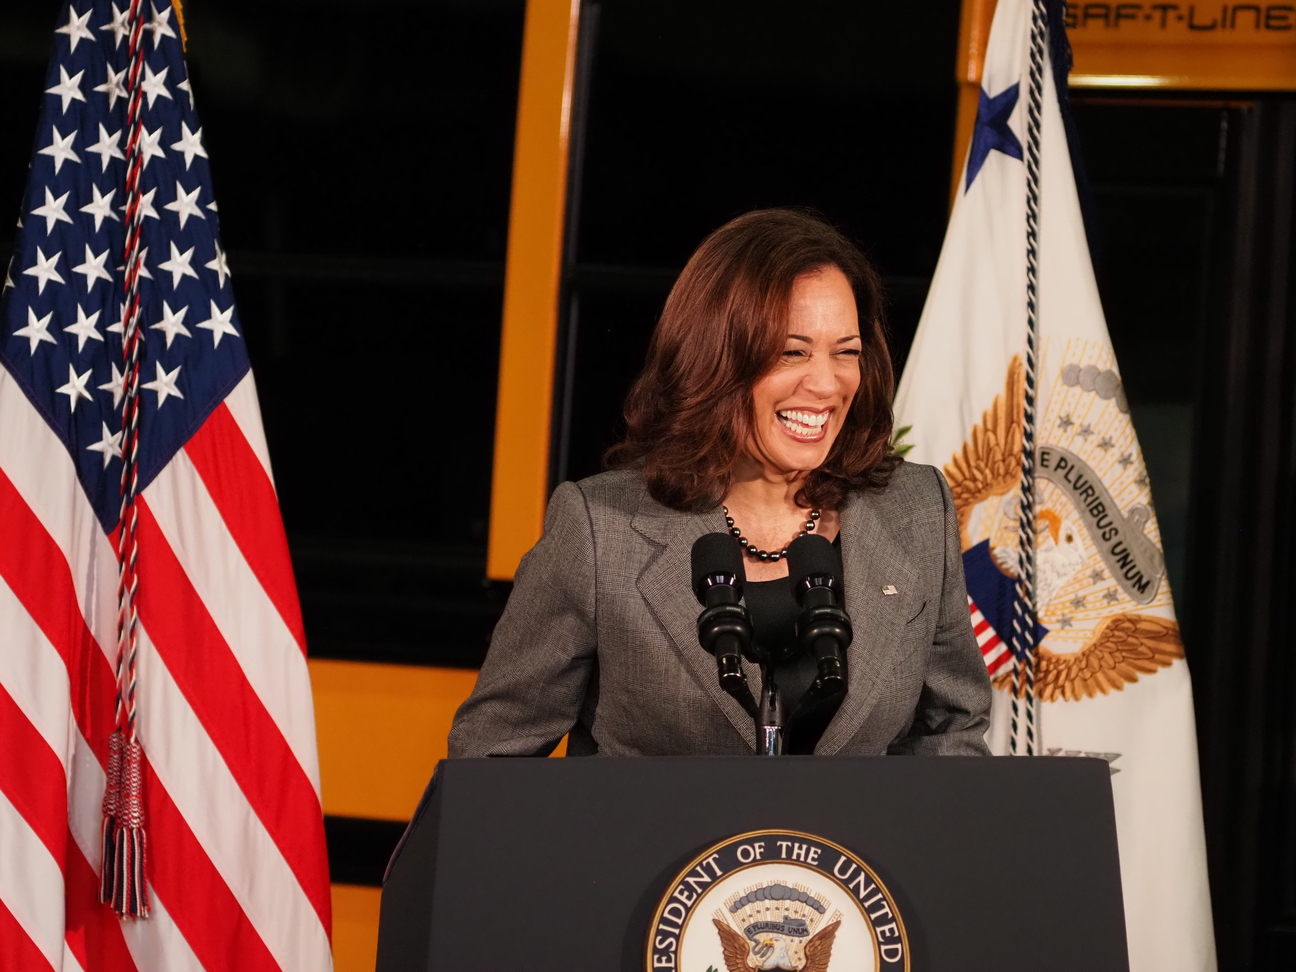 Vice President Kamala Harris takes the stage for an event in Seattle